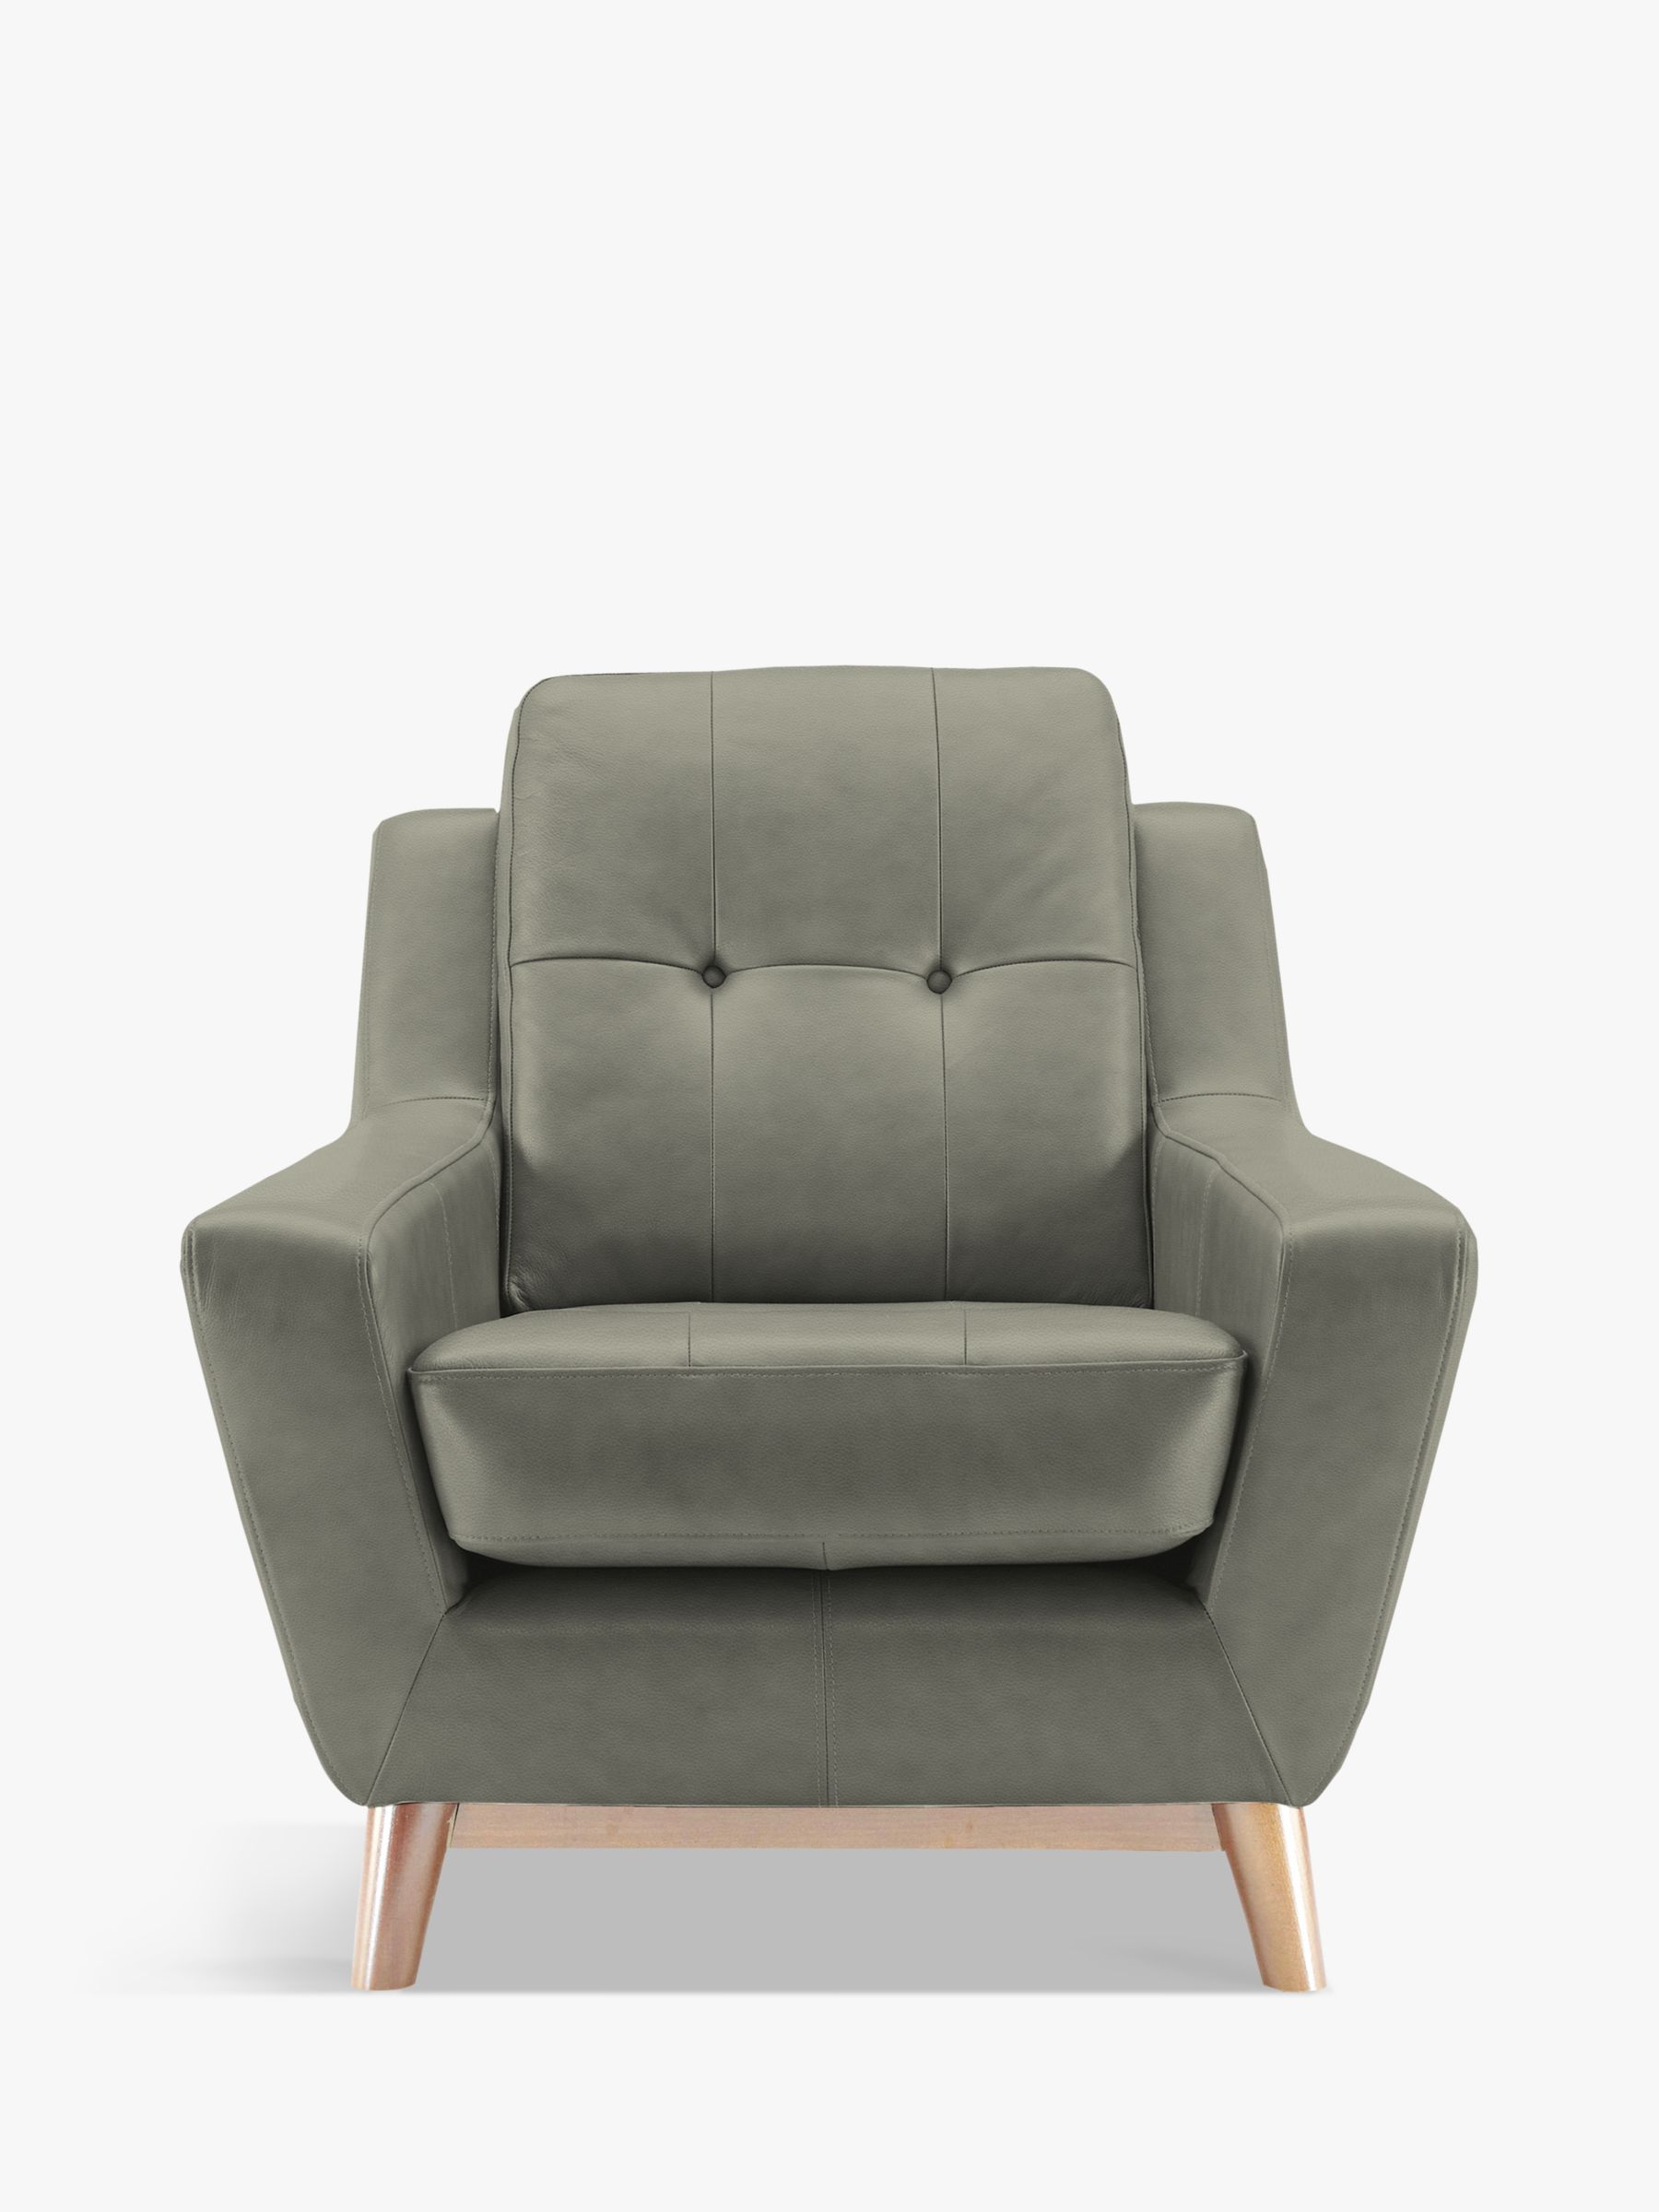 G Plan Vintage The Fifty Three Leather Armchair